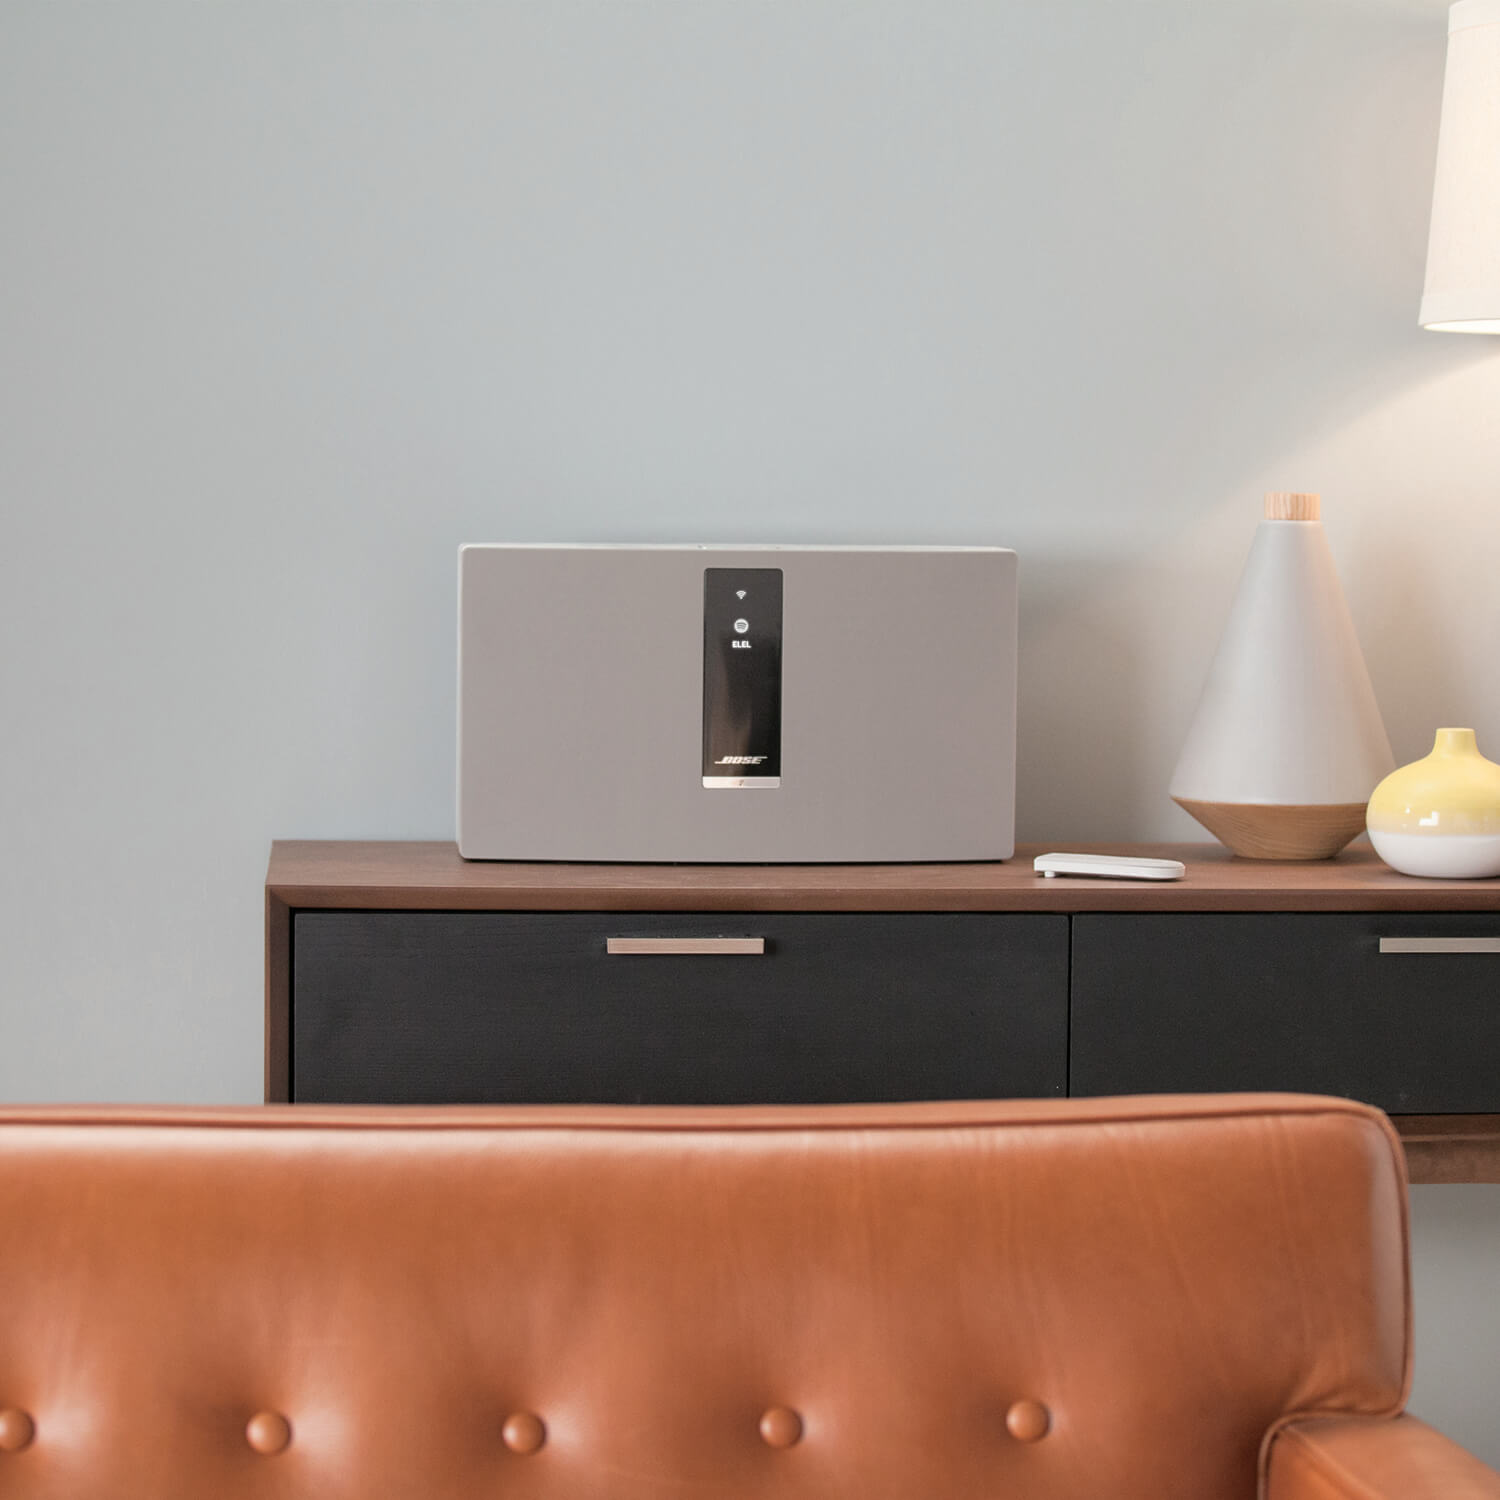 Bose SoundTouch Speakers Are Out of This World! Call Our Miami Office!